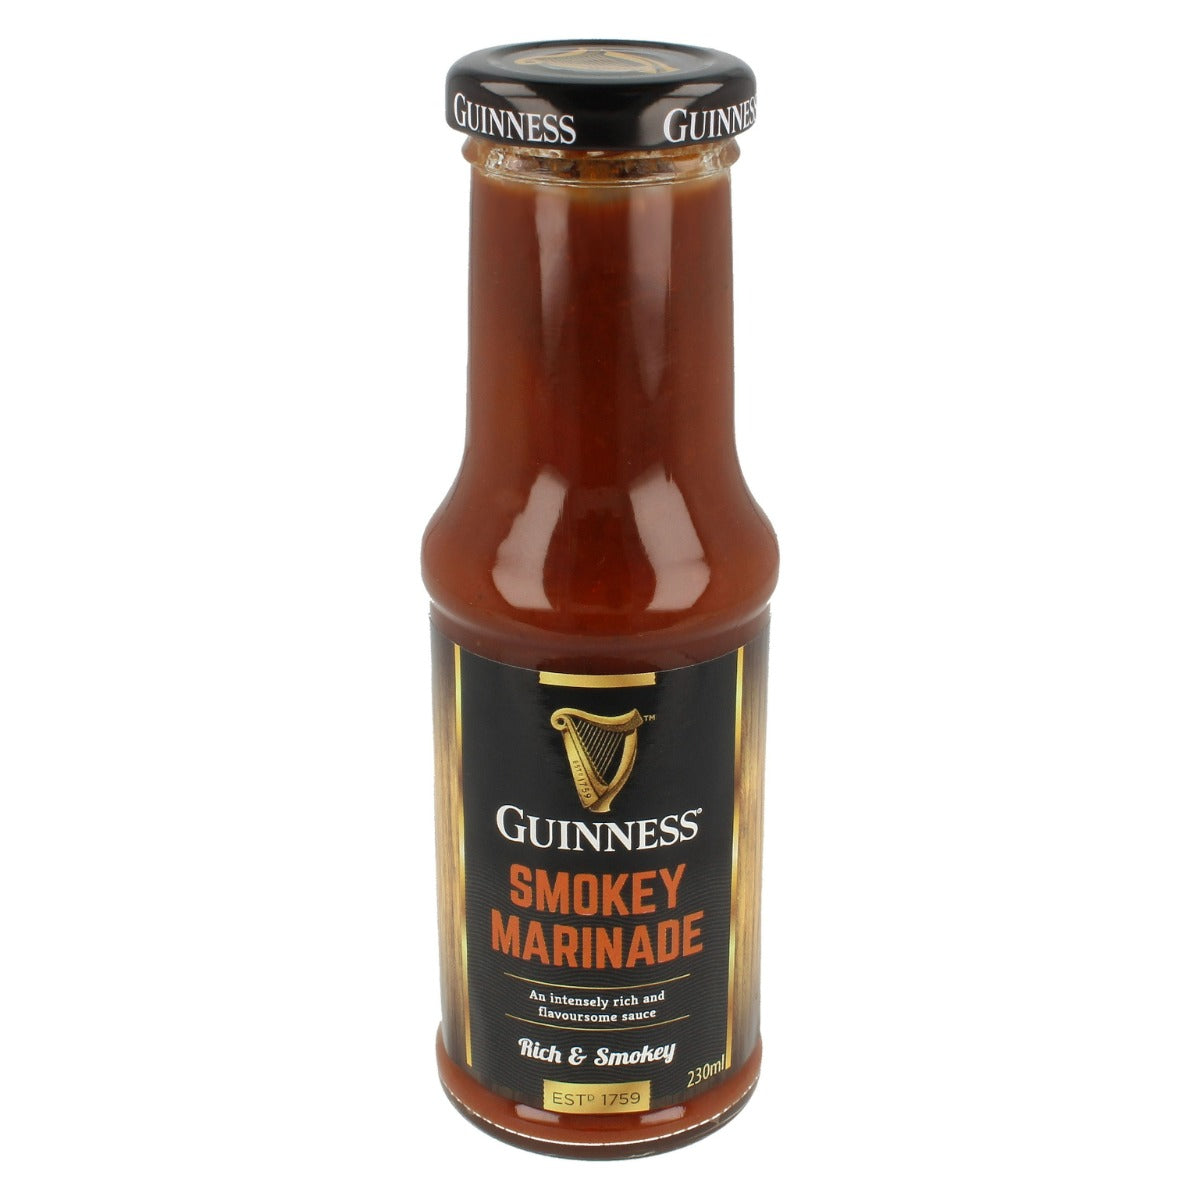 Spicy Guinness marinade sauce should be replaced with Guinness Smokey Marinade Sauce by Guinness.